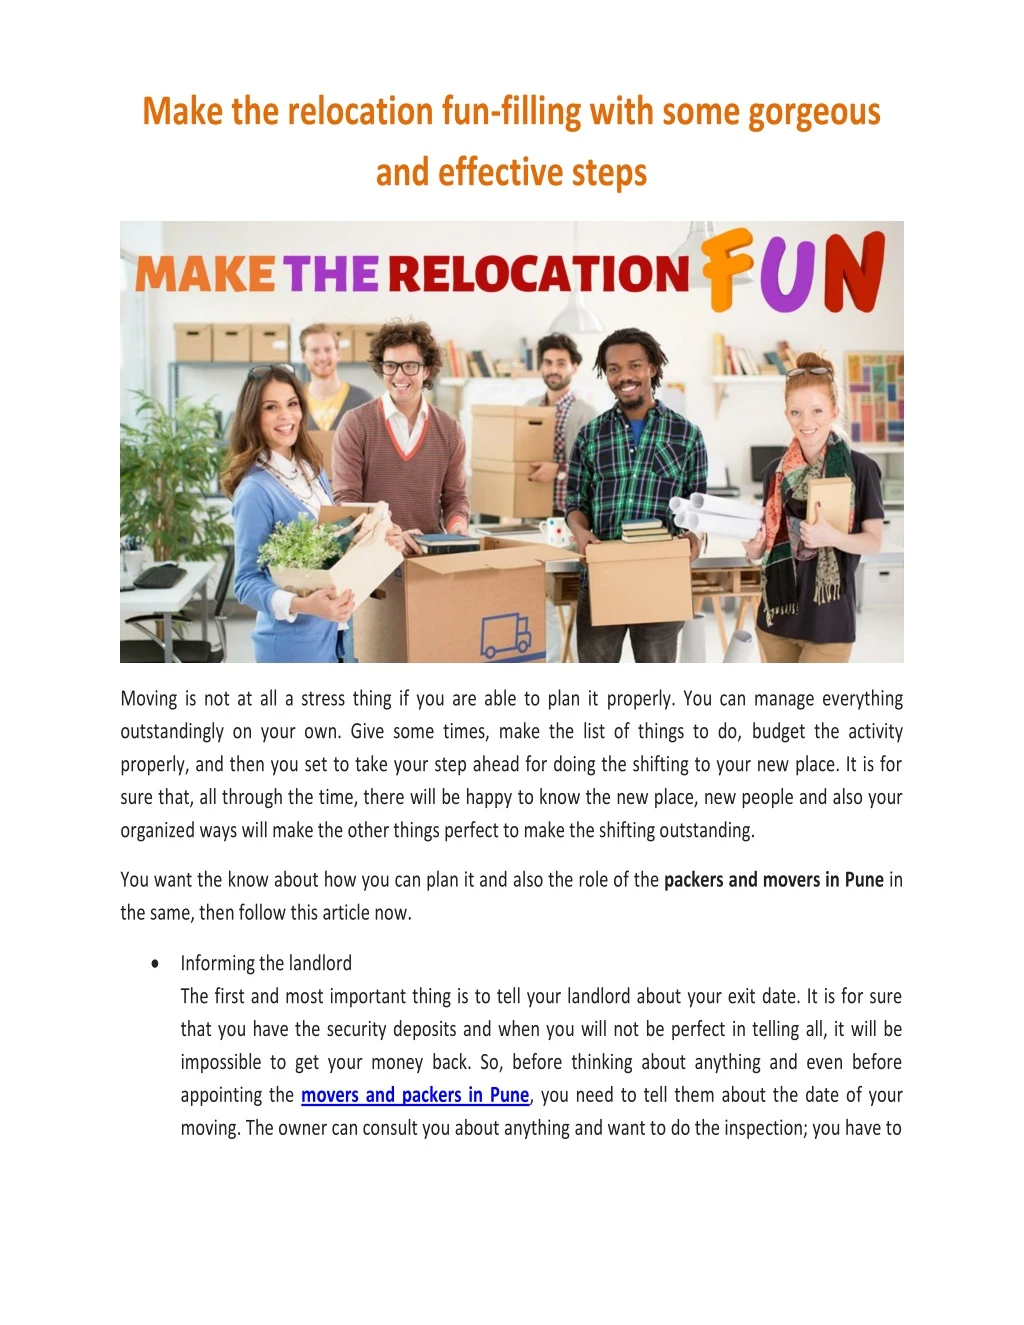 make the relocation fun filling with some